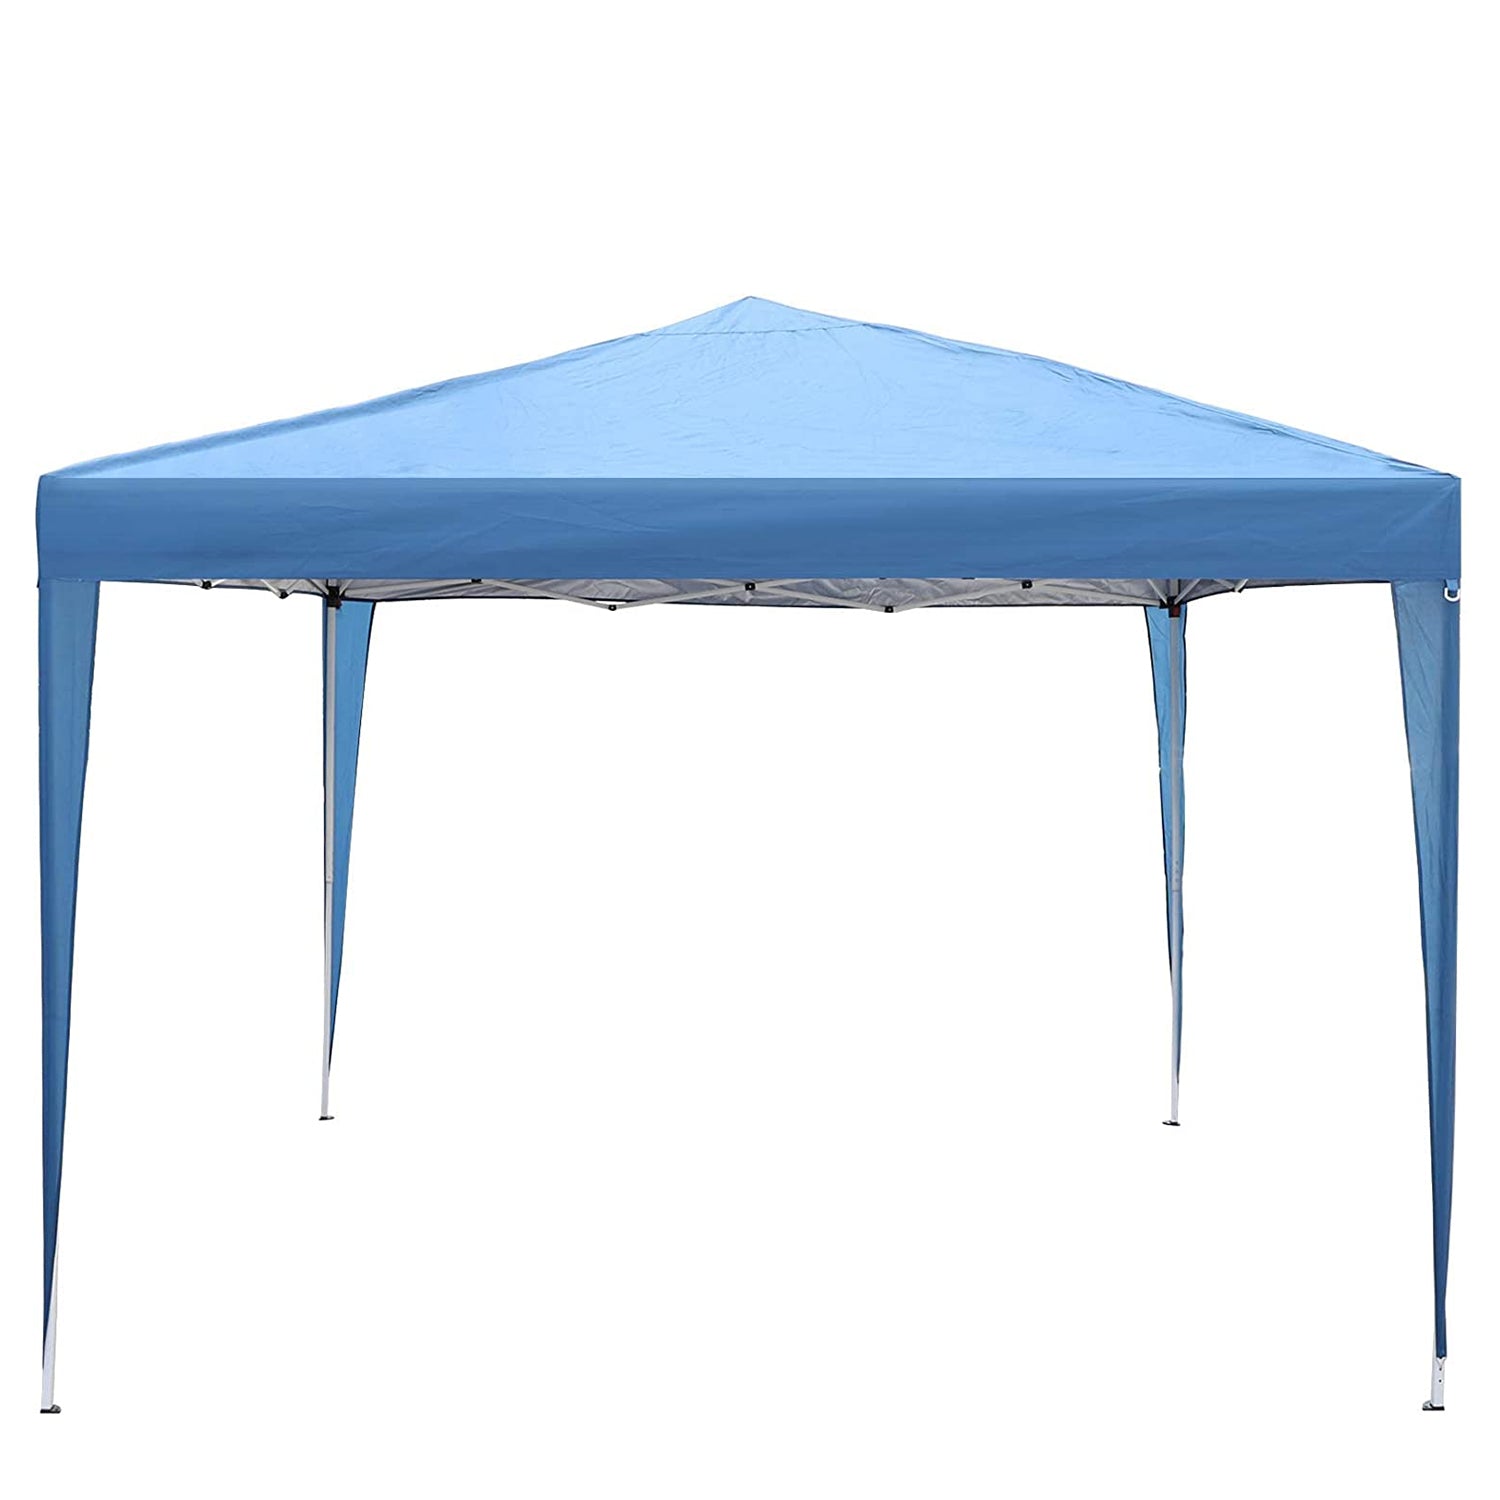 10 ft. Foldable Pop Up Canopy Tent with Mesh Sidewall Height Adjustable Outdoor Gazebos with Carrying Bag for Parties, Picnics & Camping, Blue